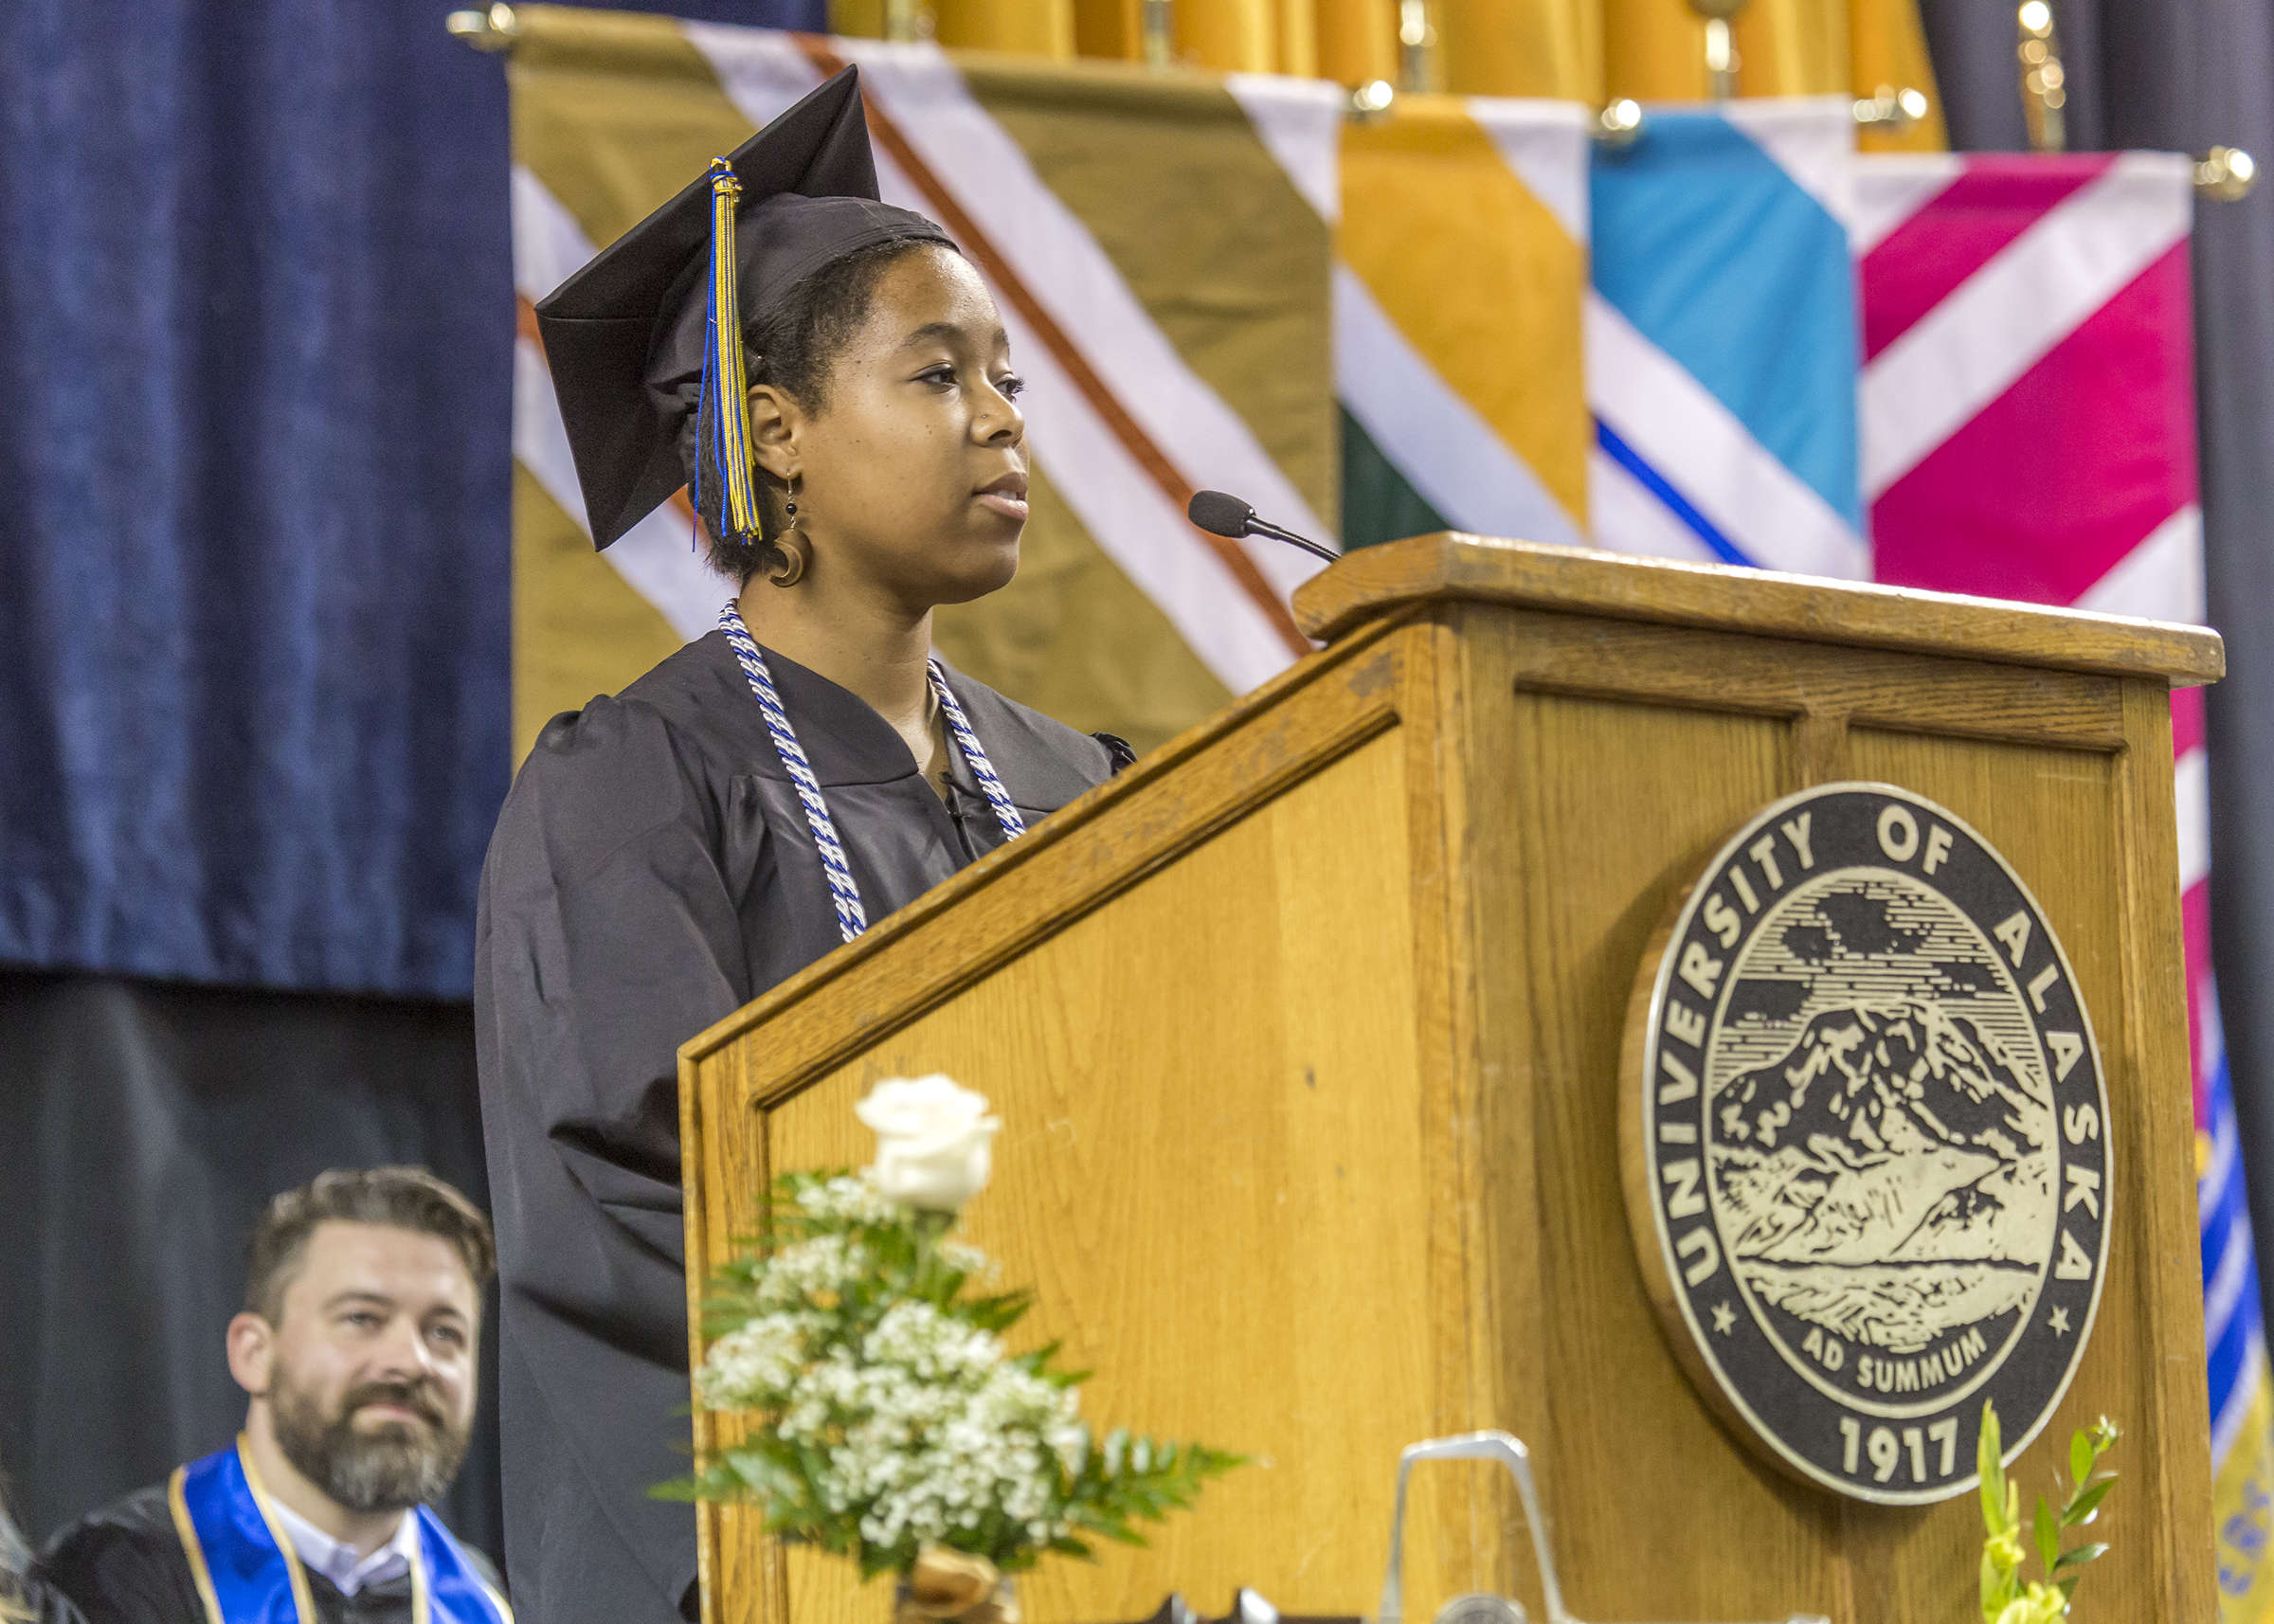 Chavis speaking at the UAF 2015 commencement